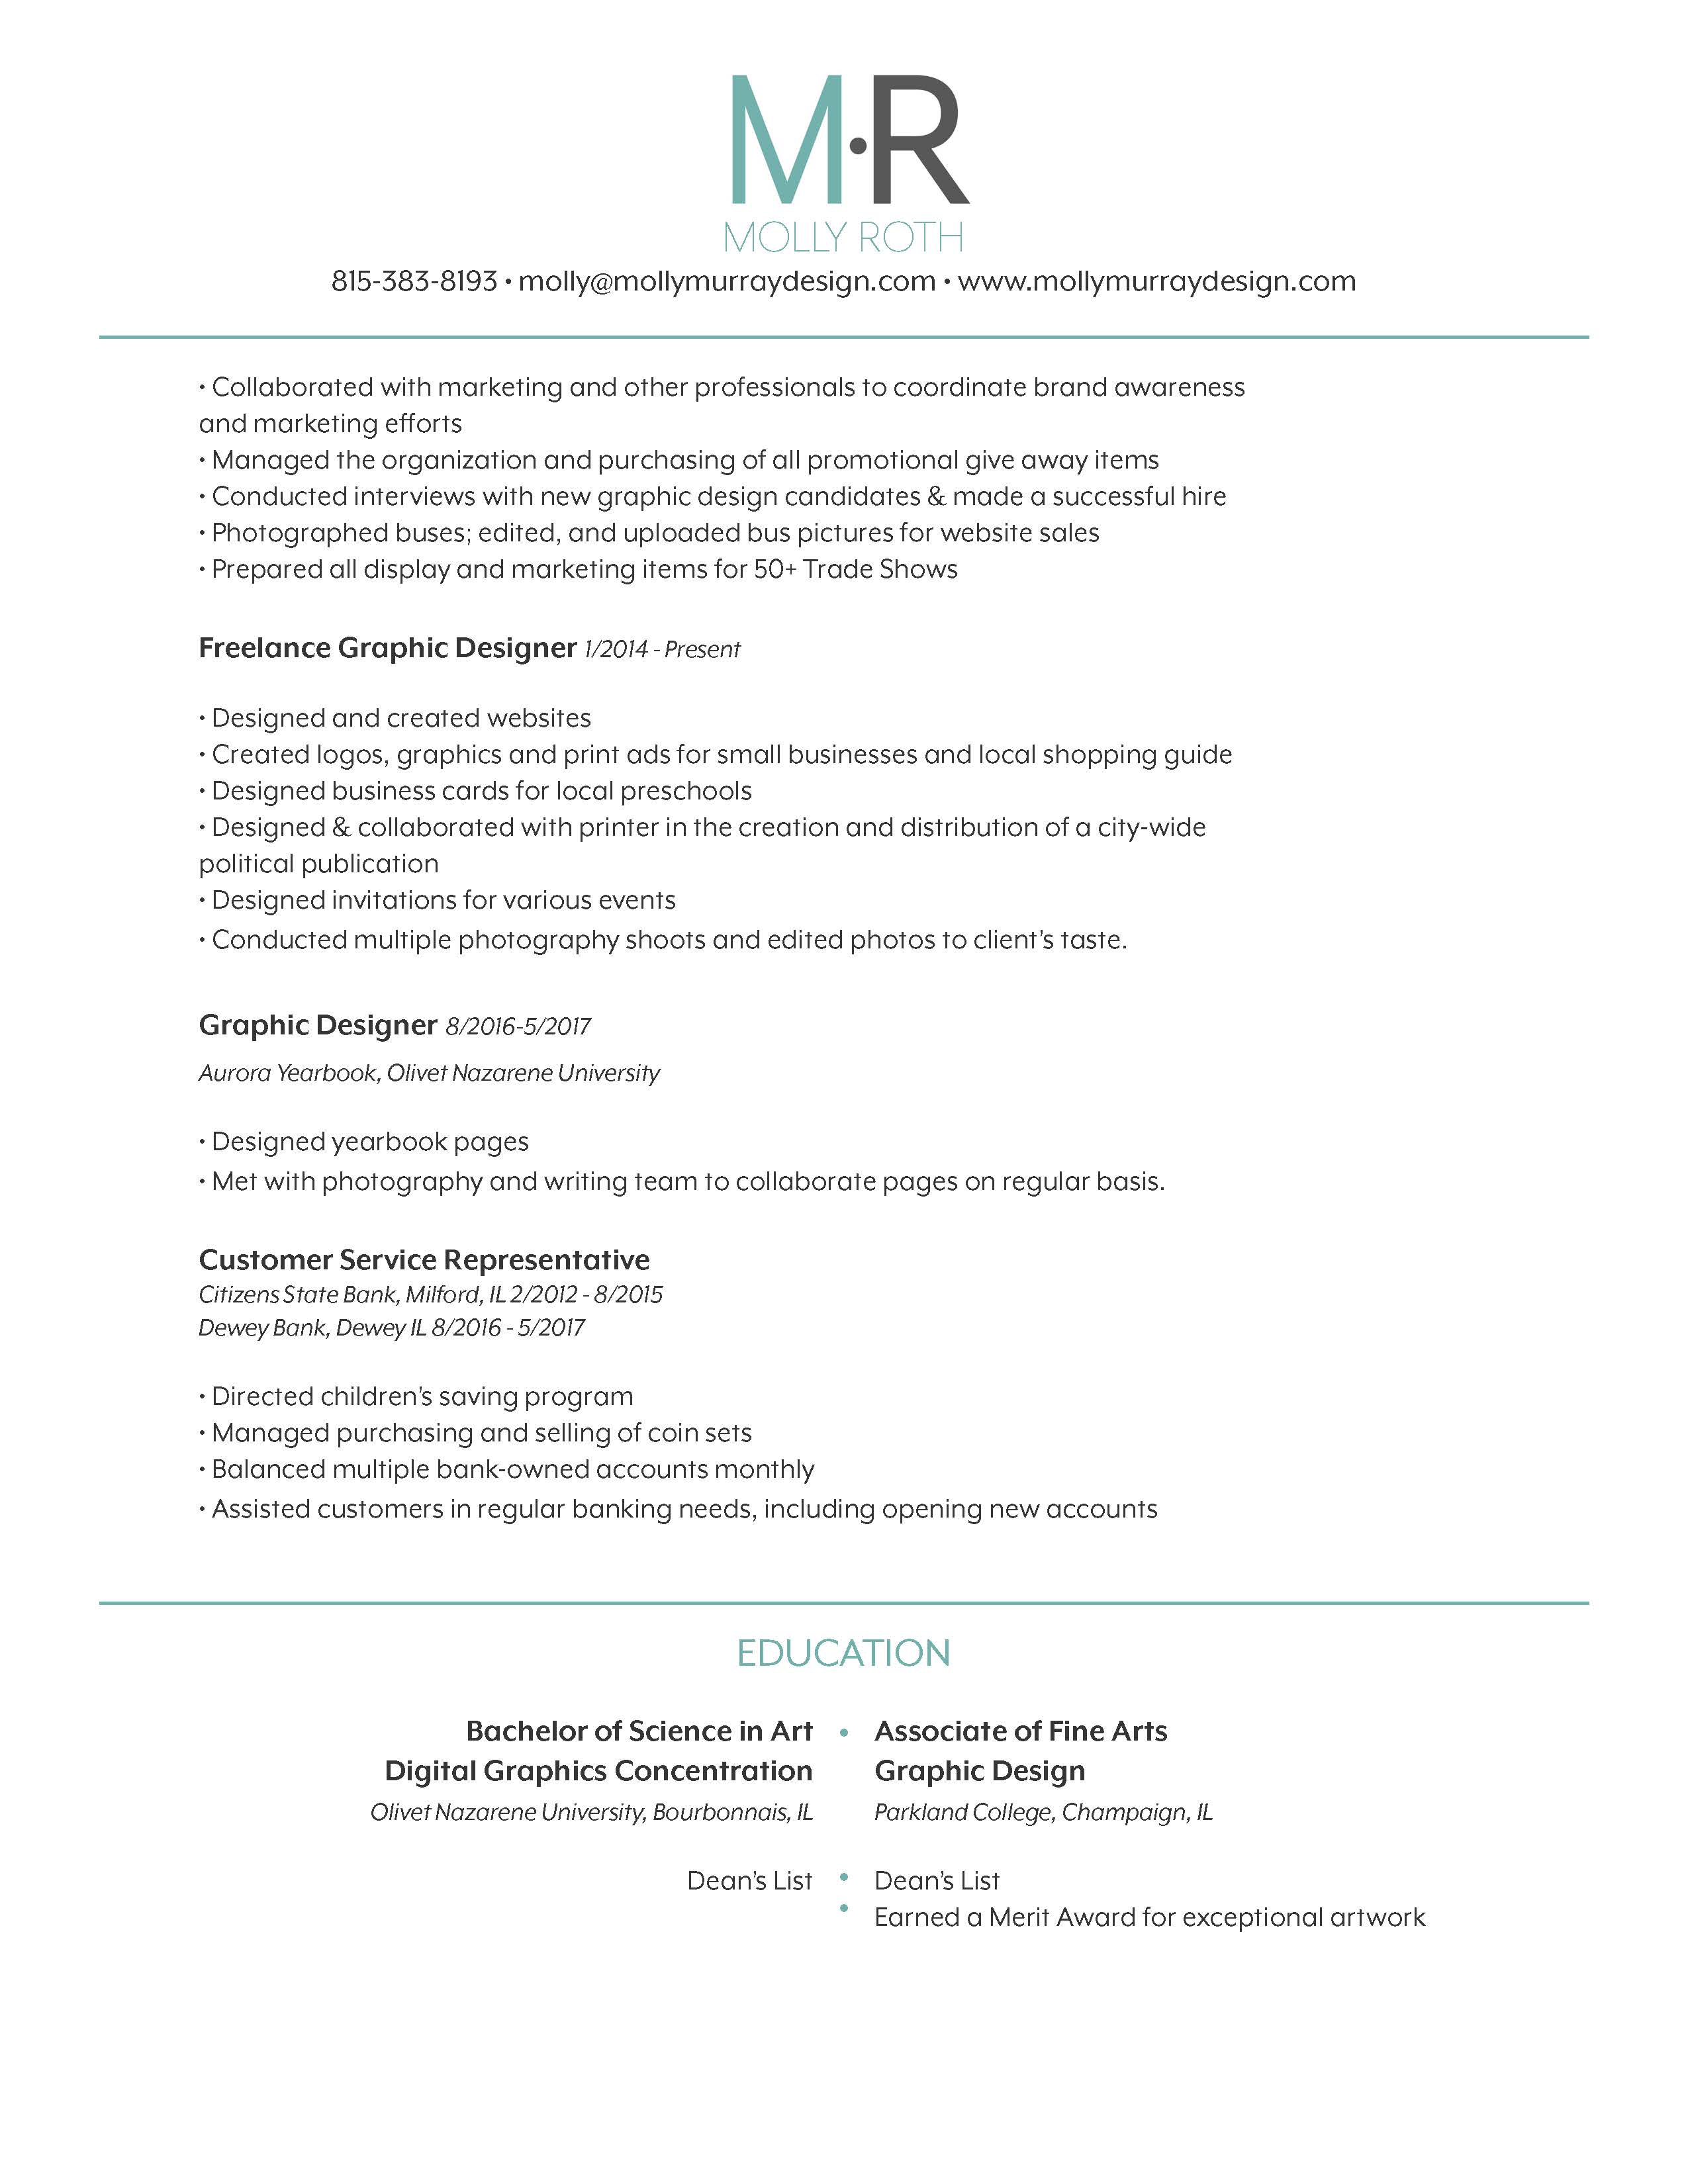 Resume - Roth 11-1-18_Page_2